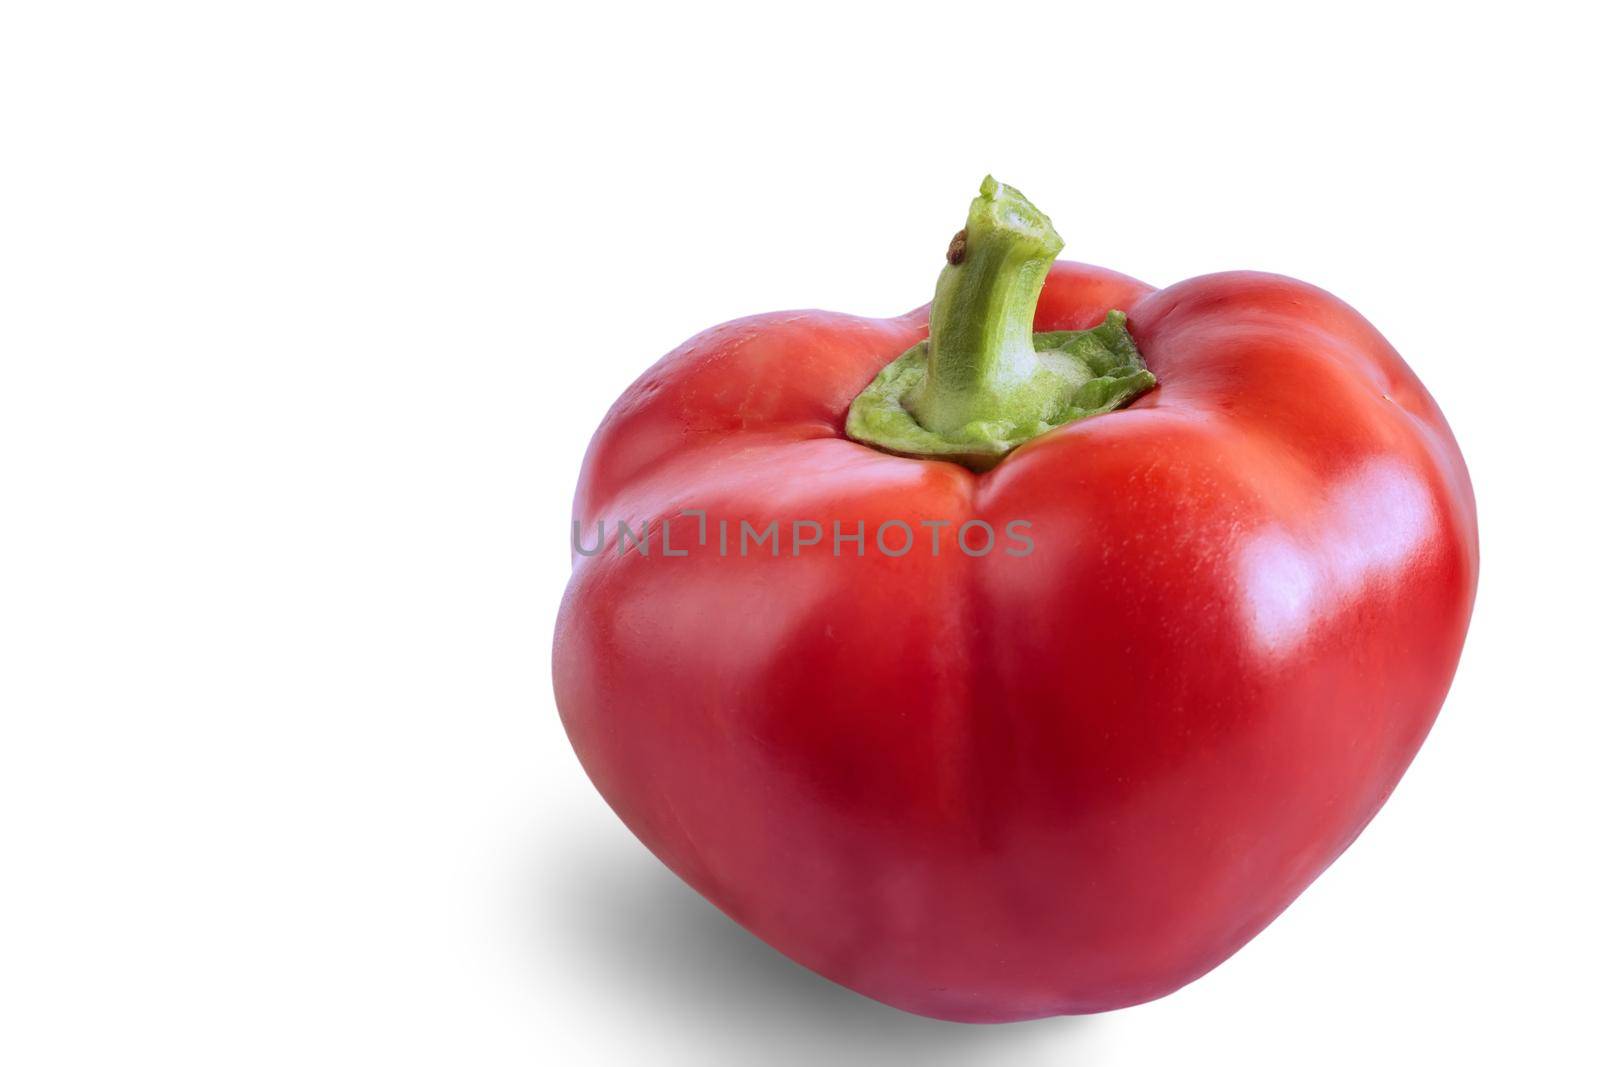 Large red bell pepper oblong shape. Presented in close-up, isolated on a white background